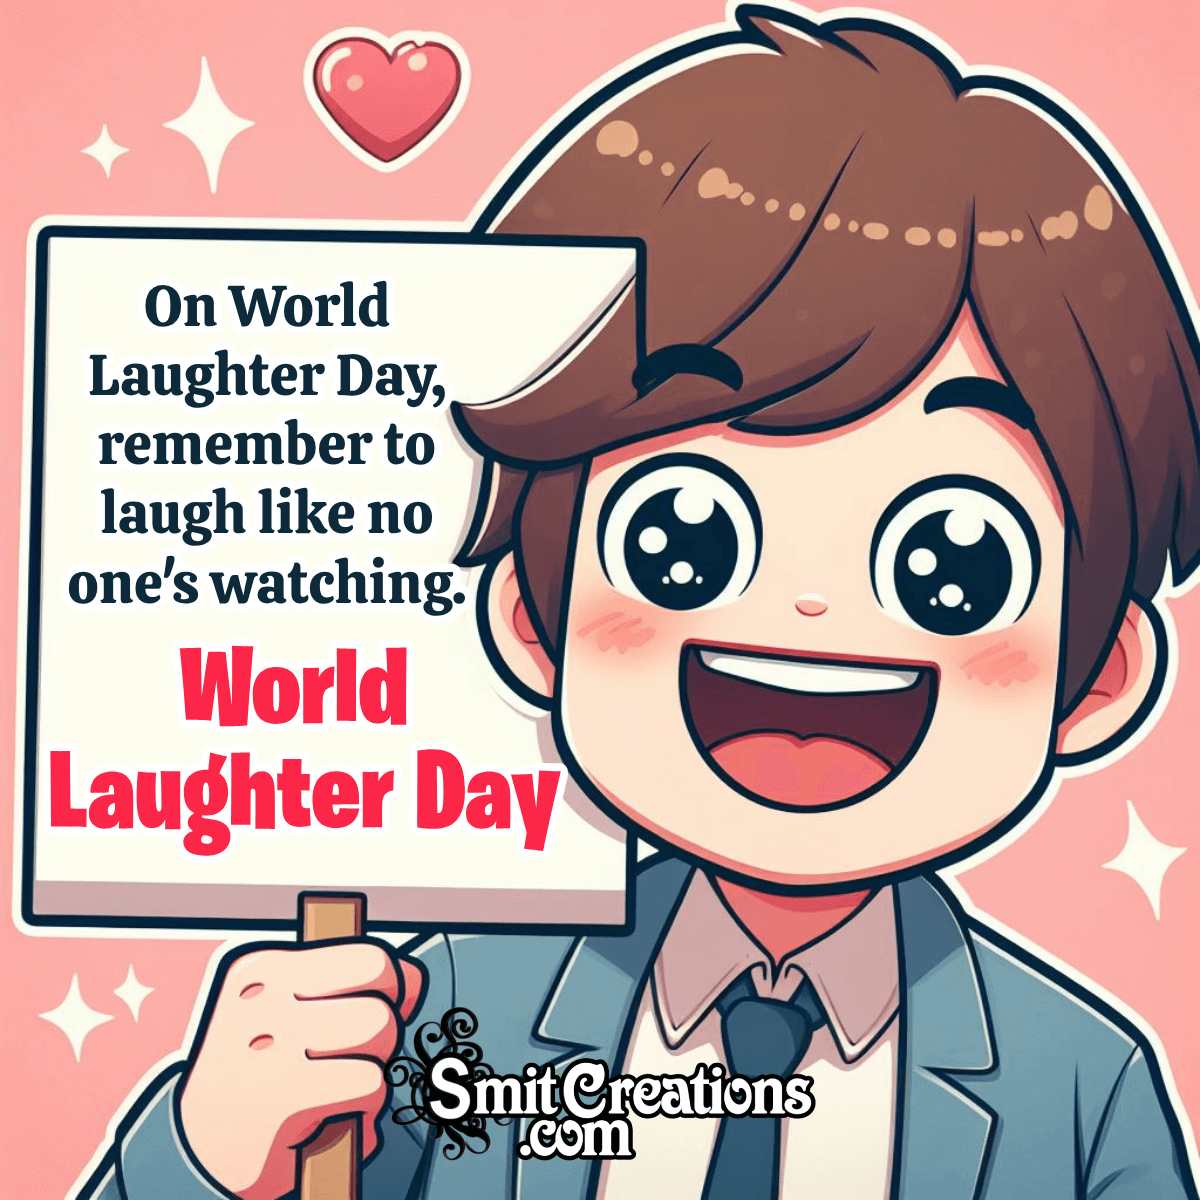 World Laughter Day Message Pic